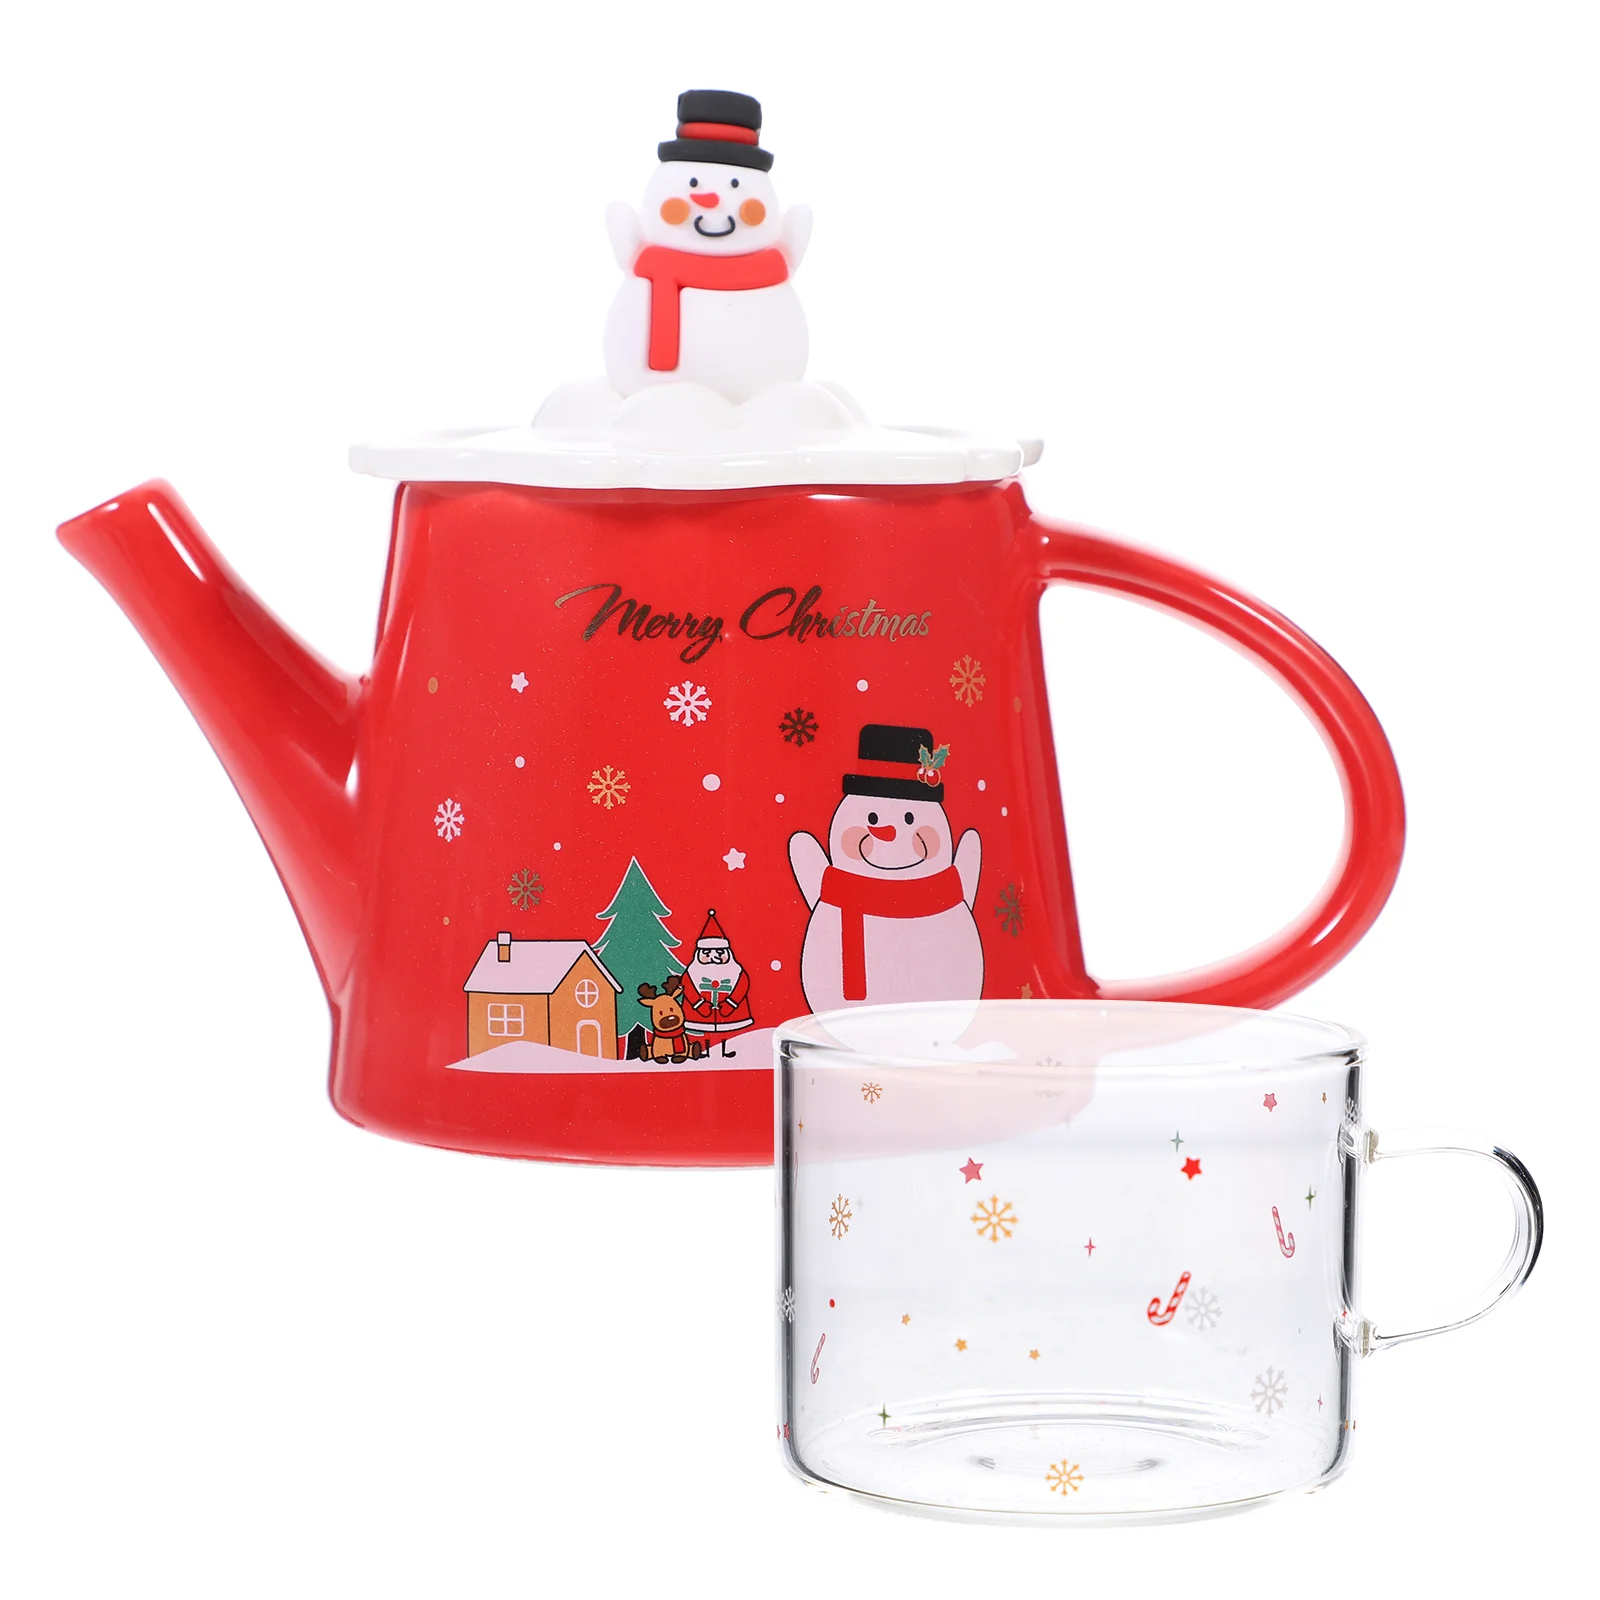 

Water Cup Household Tea Ware Christmas Party Teaware Serving Tool Pot Kettle Gift Gift Set